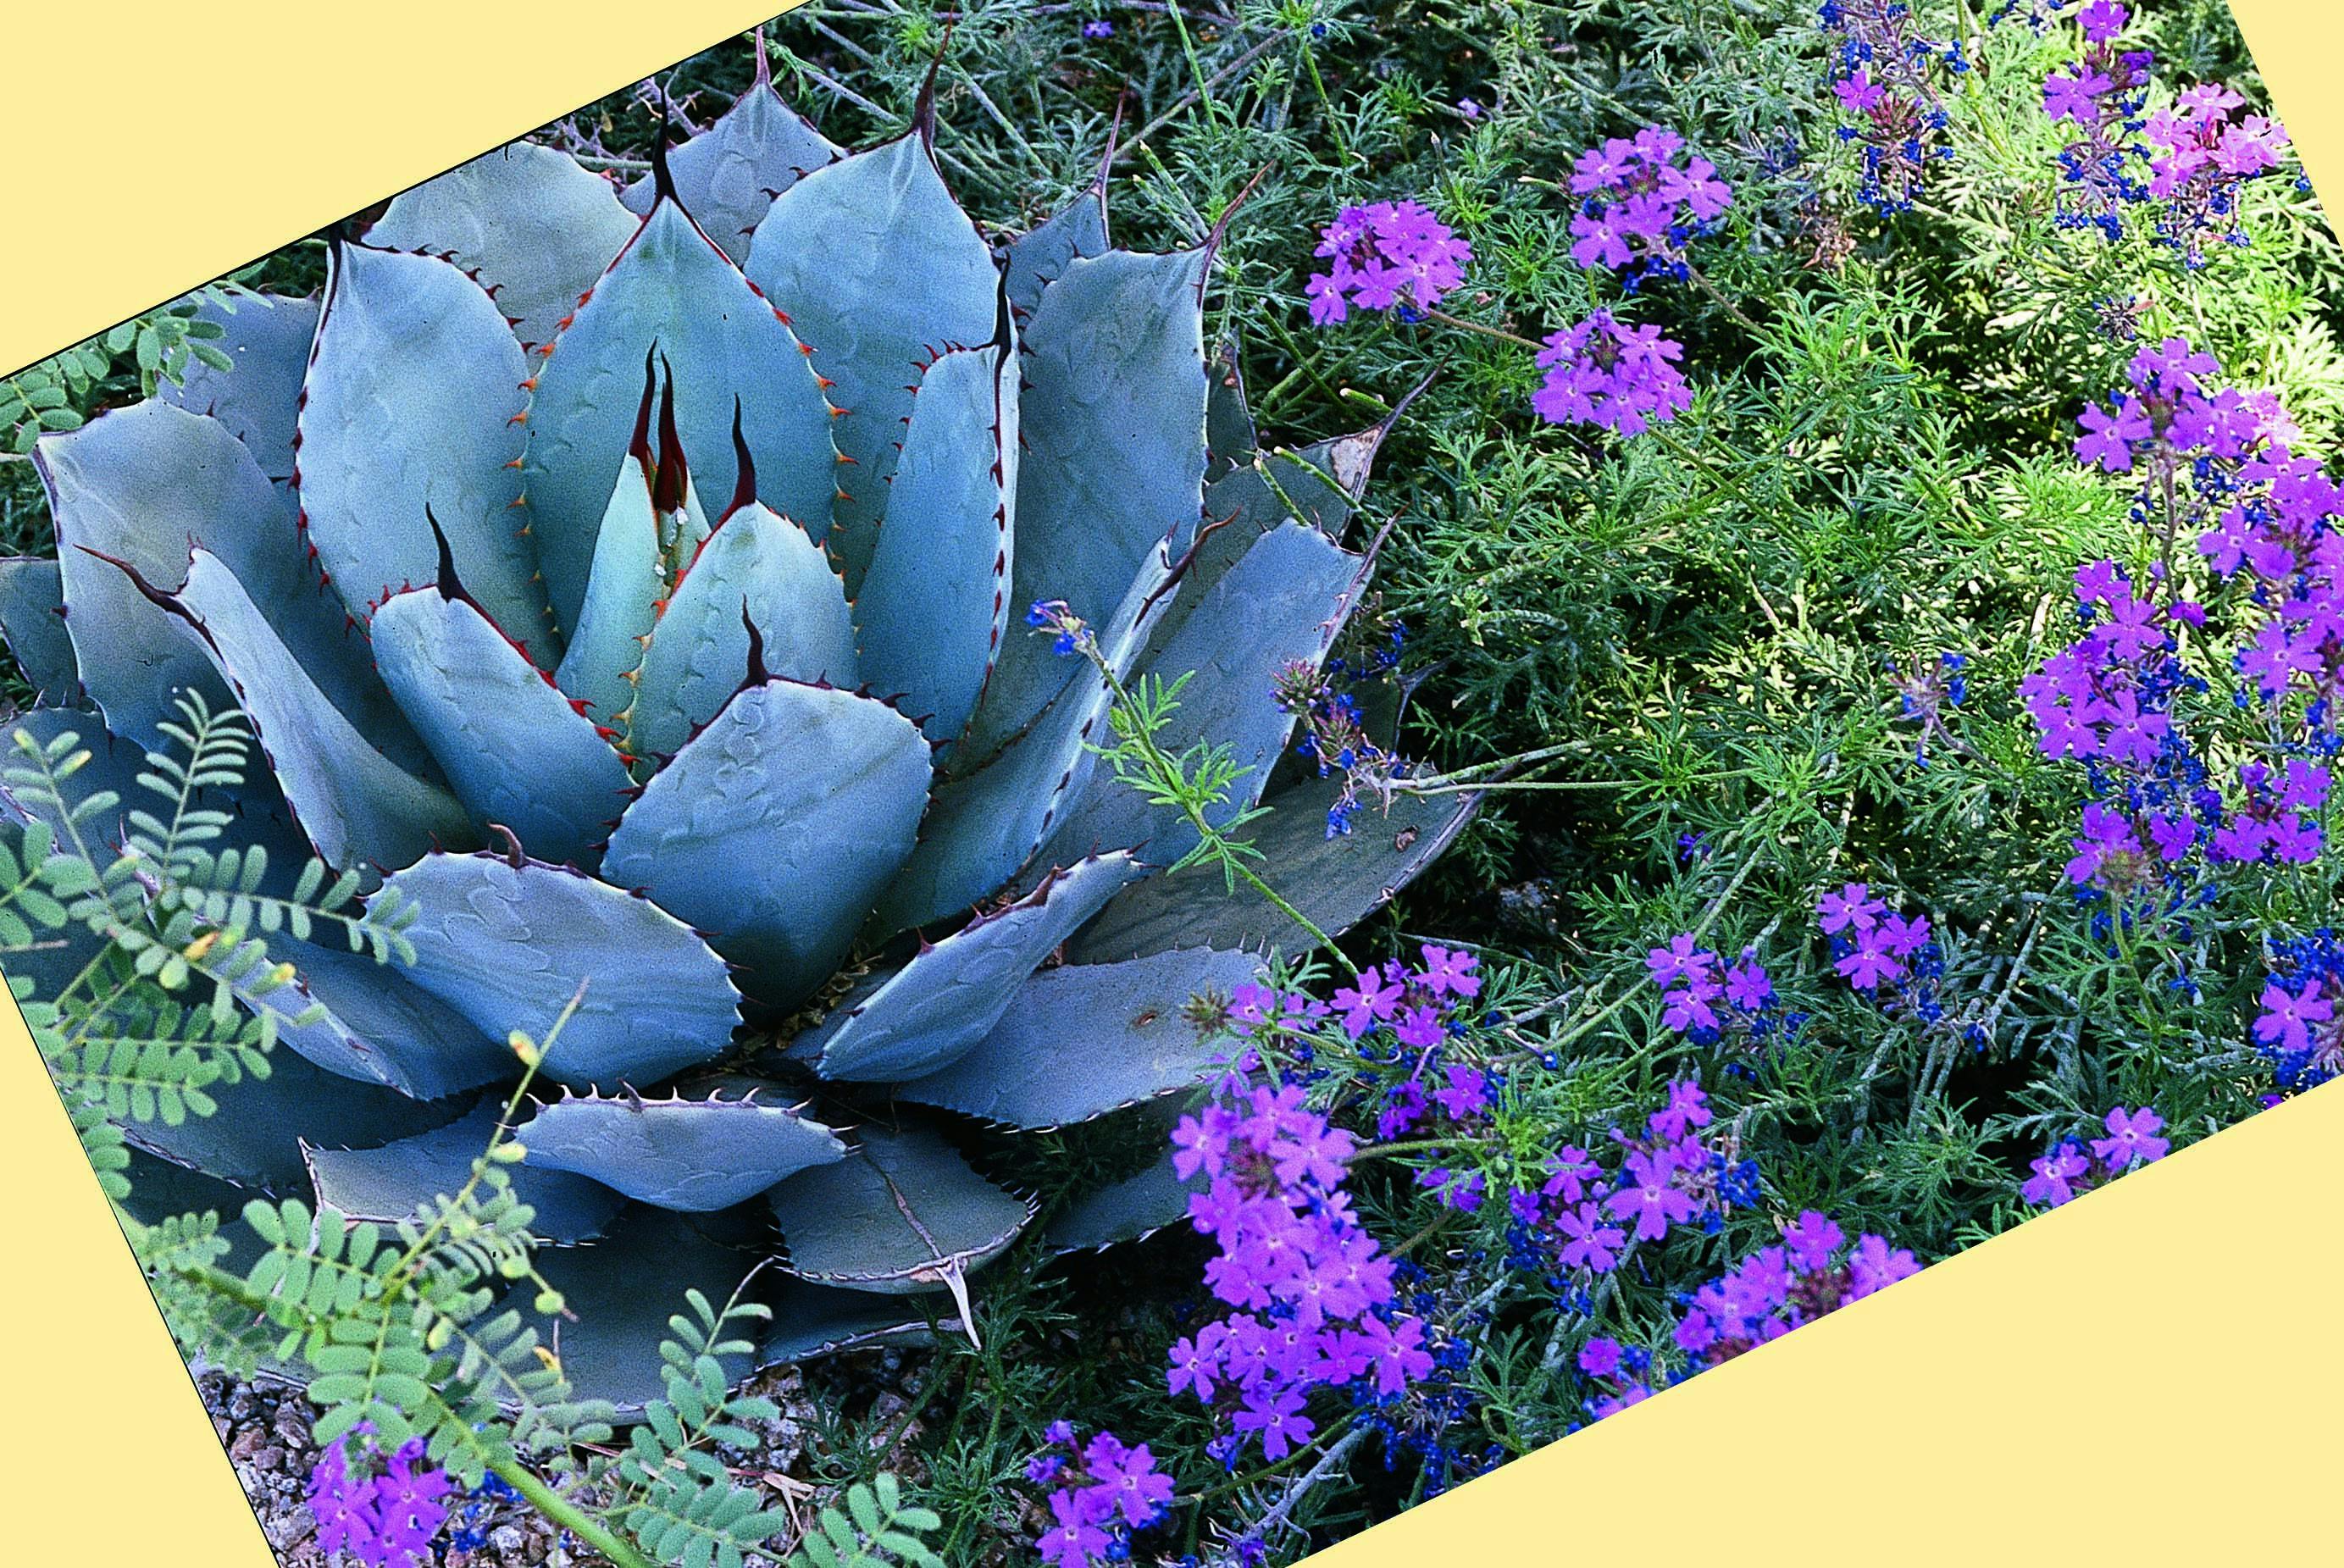 Agave and wildflowers